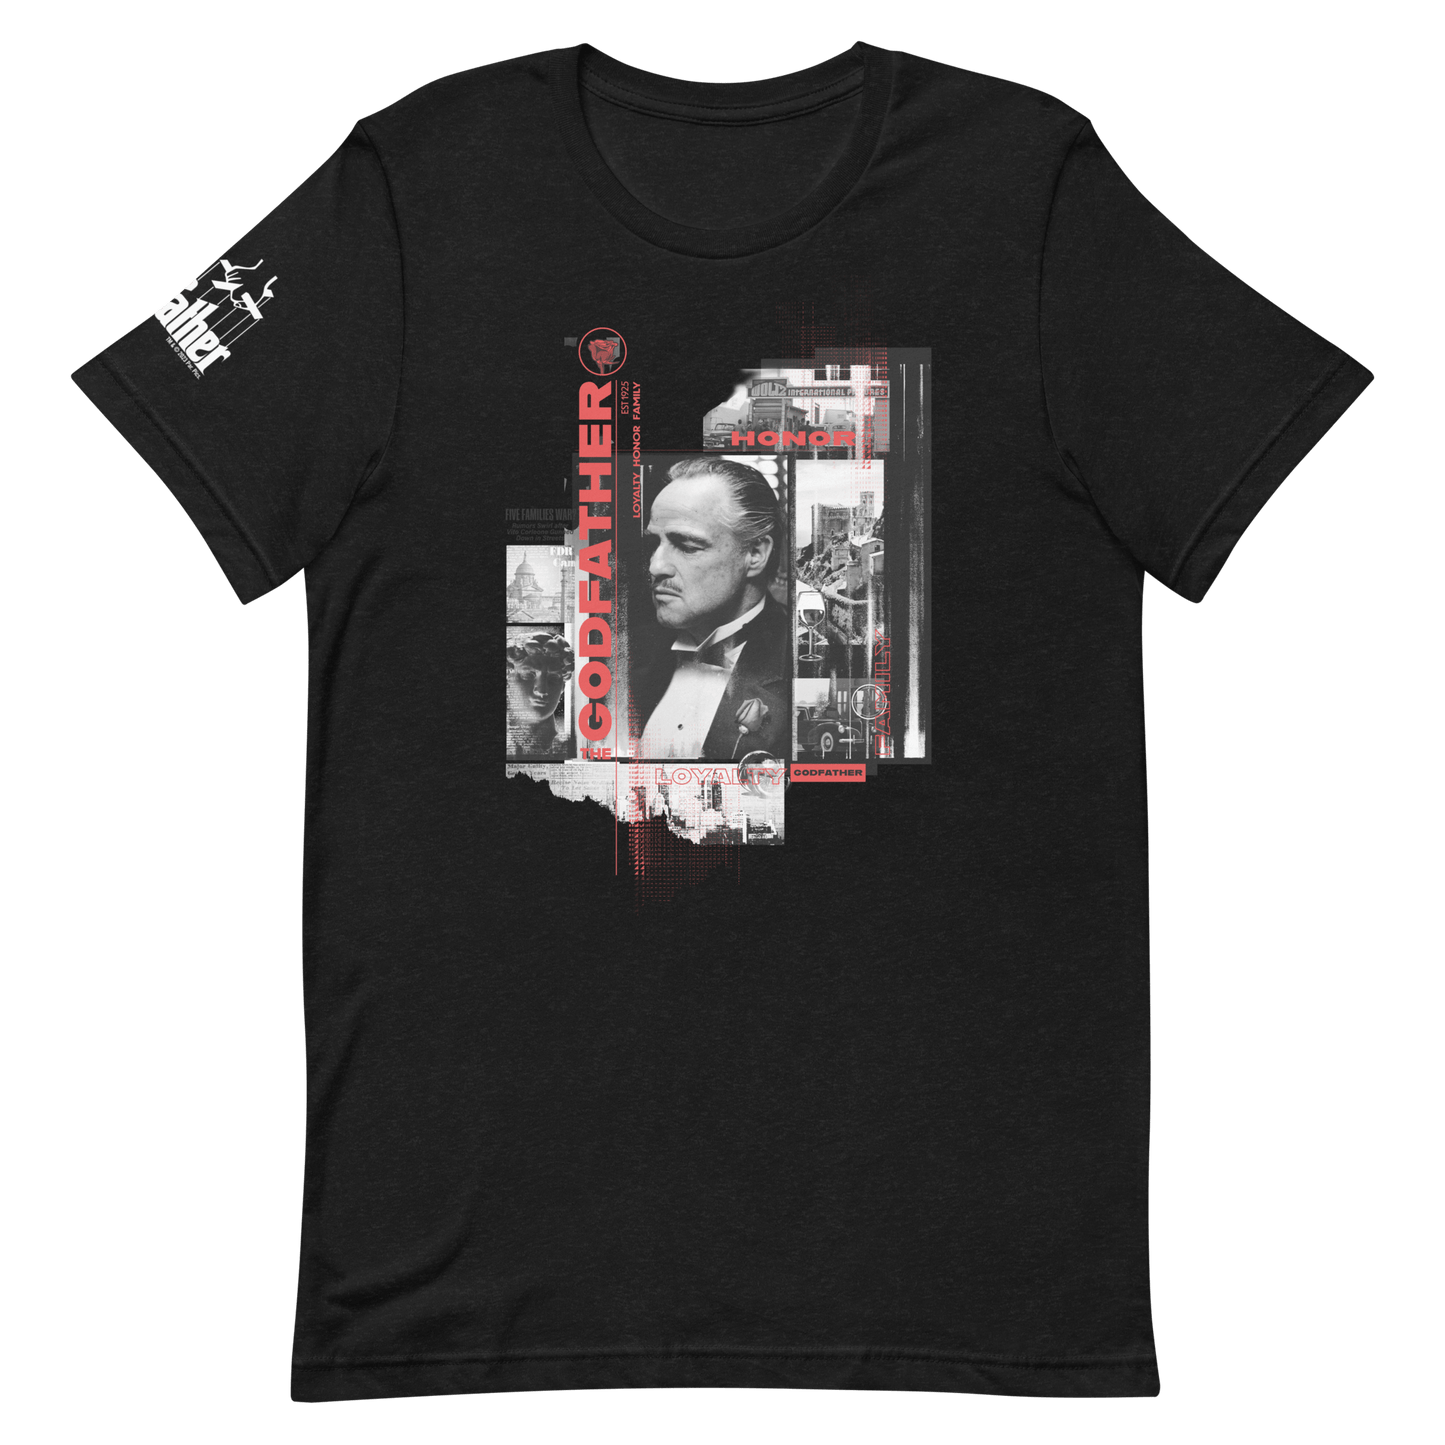 The Godfather "Honor Loyalty Family" Adult Short Sleeve T - Shirt - Paramount Shop